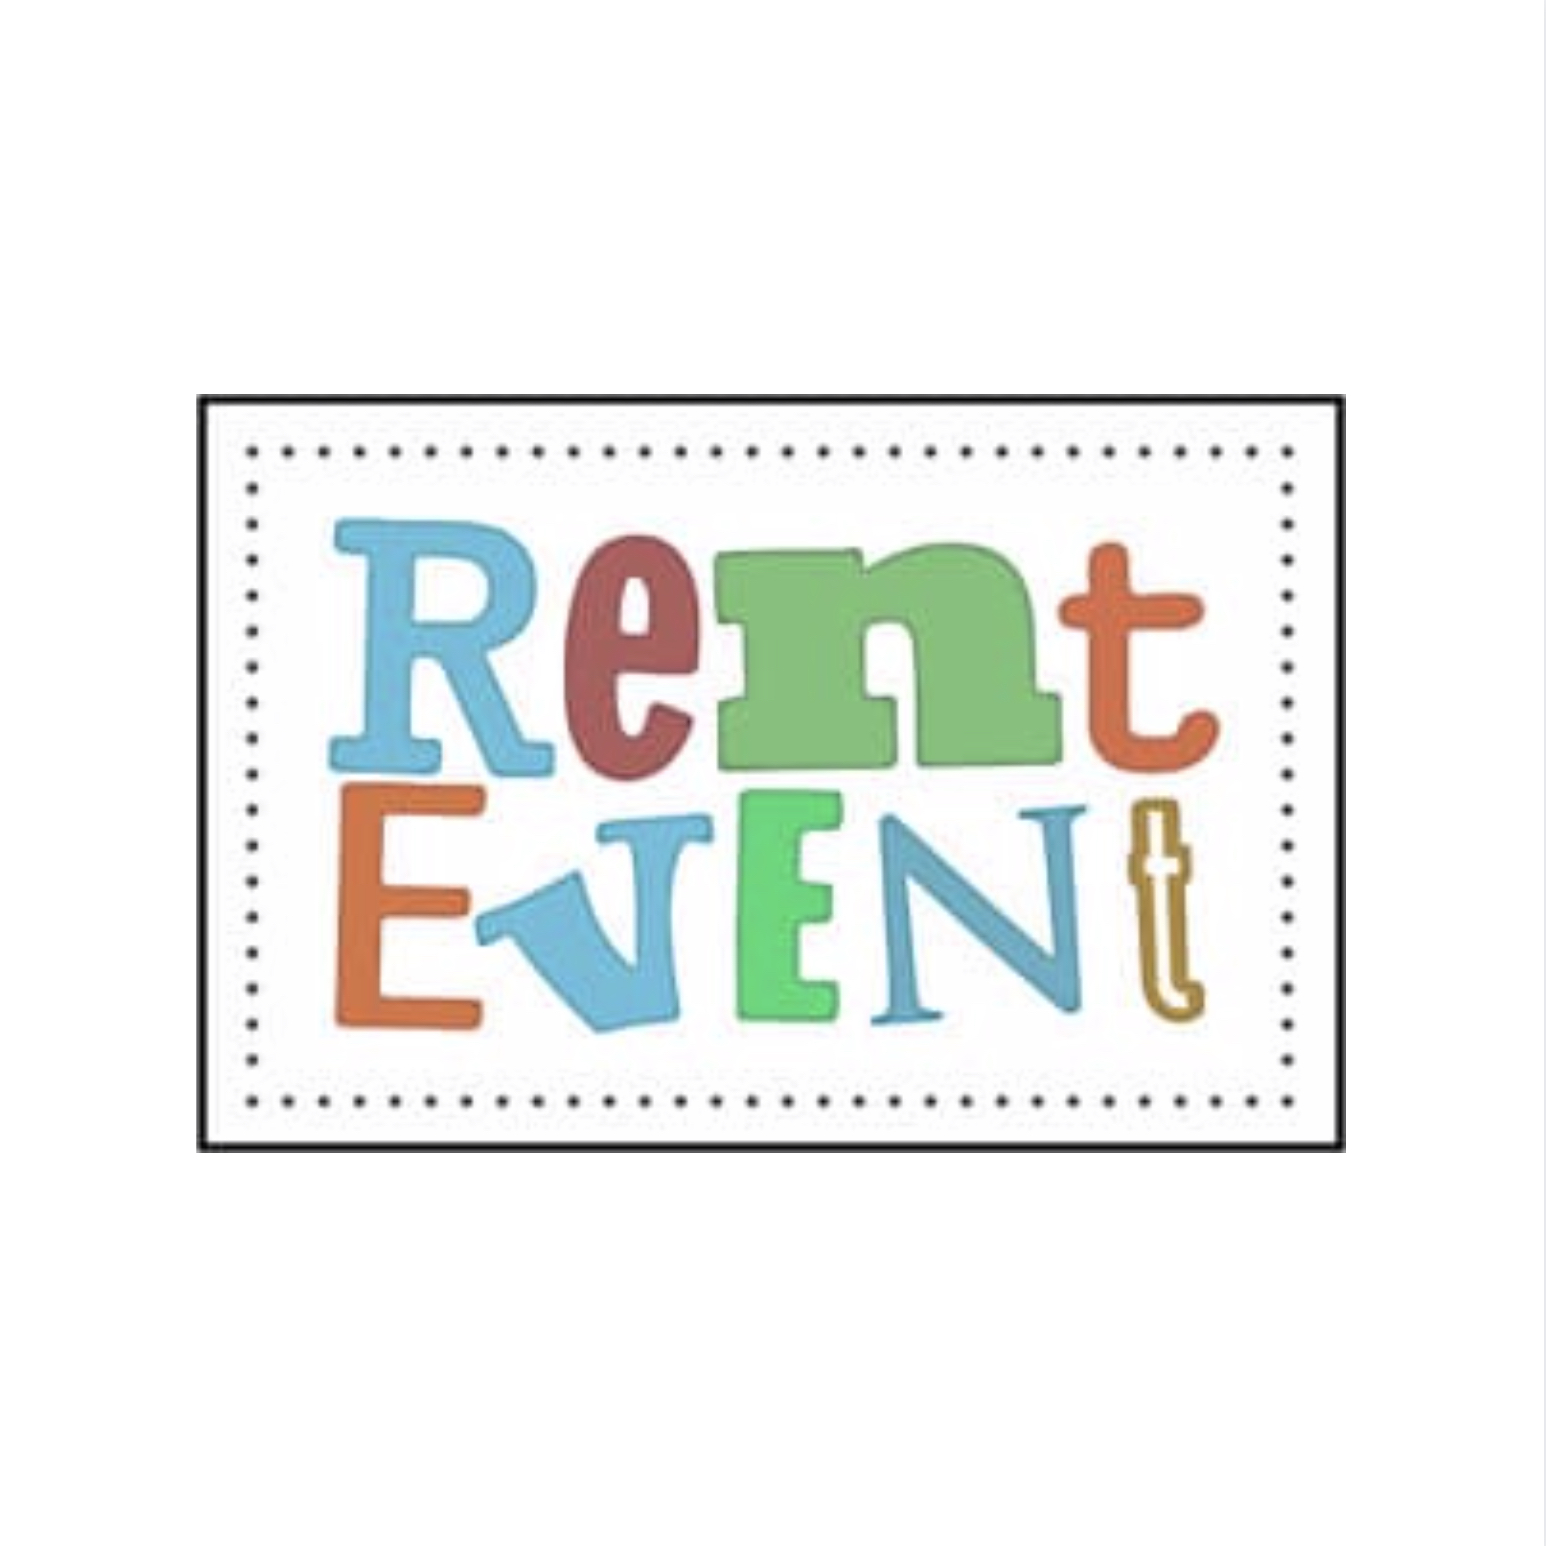 rent event - wedding props and furniture hire